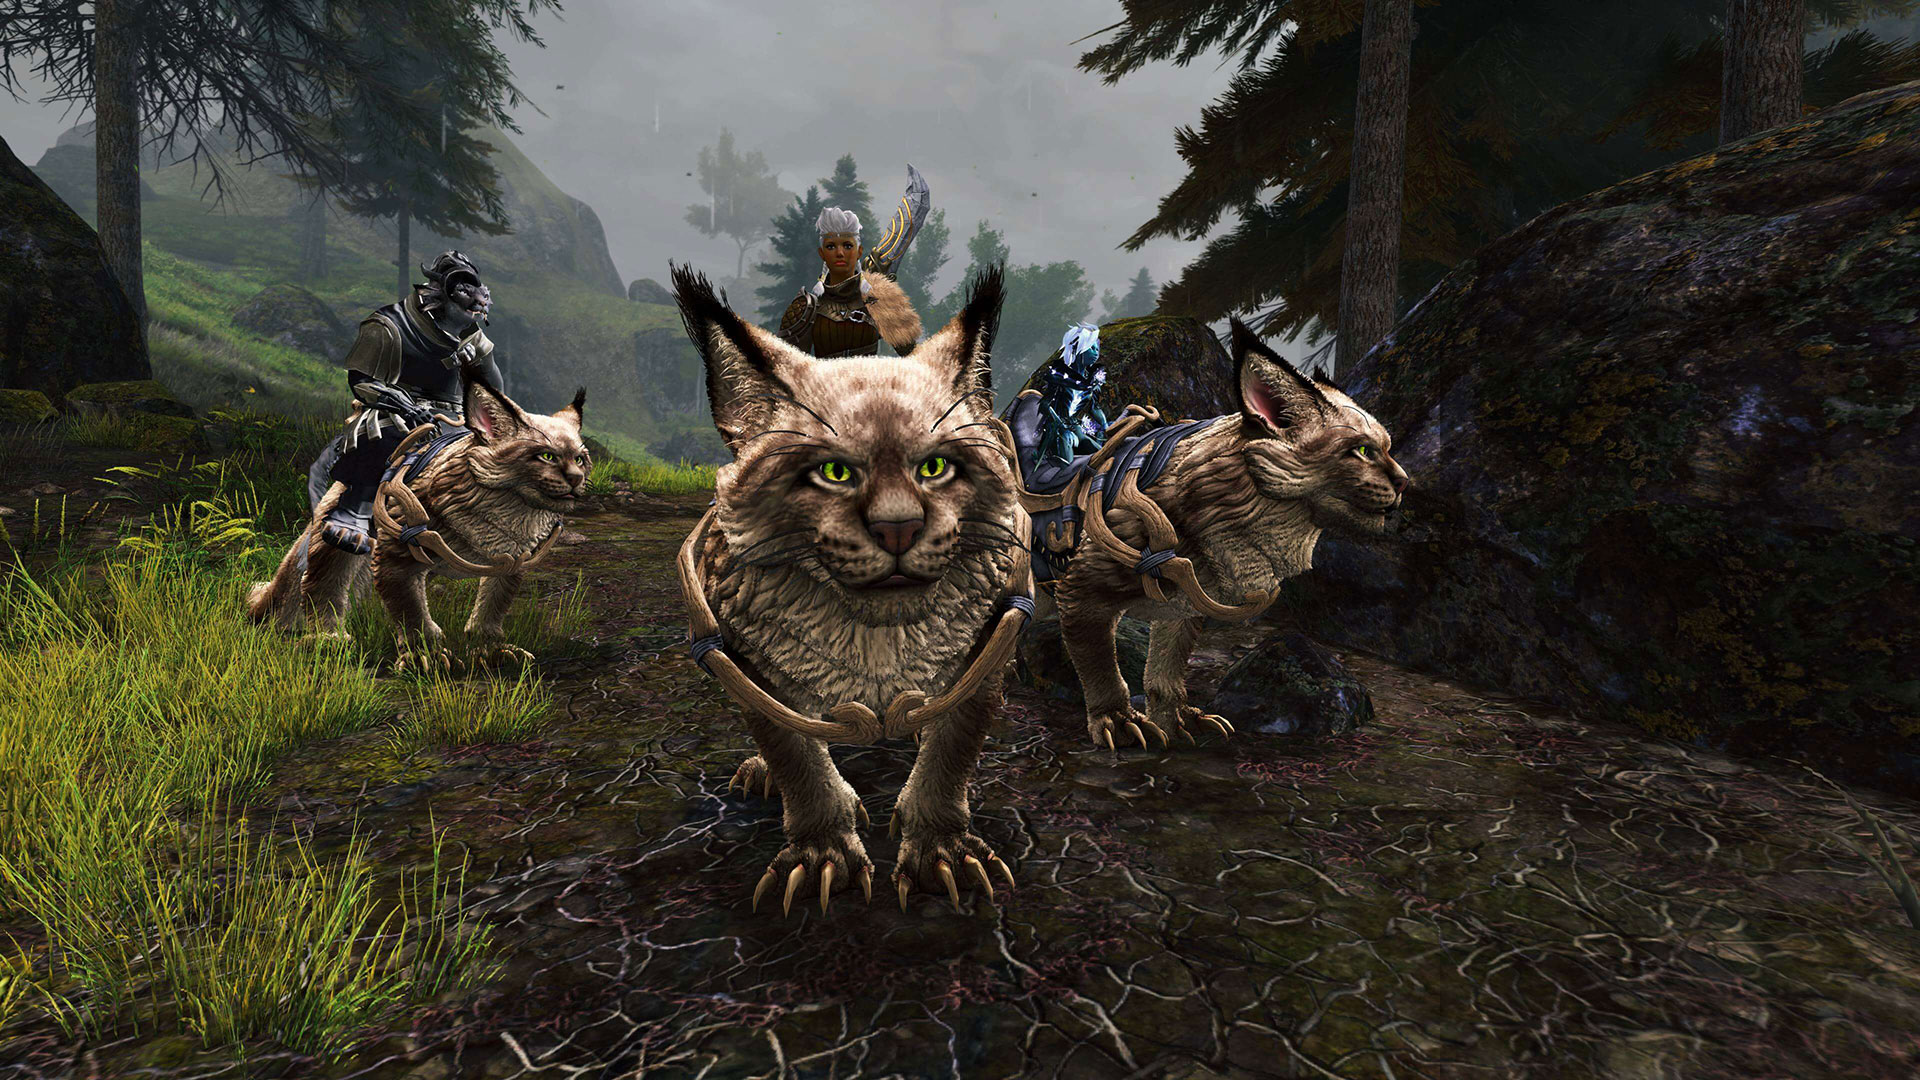 Guild Wars 2: Janthir Wilds launches on August 20